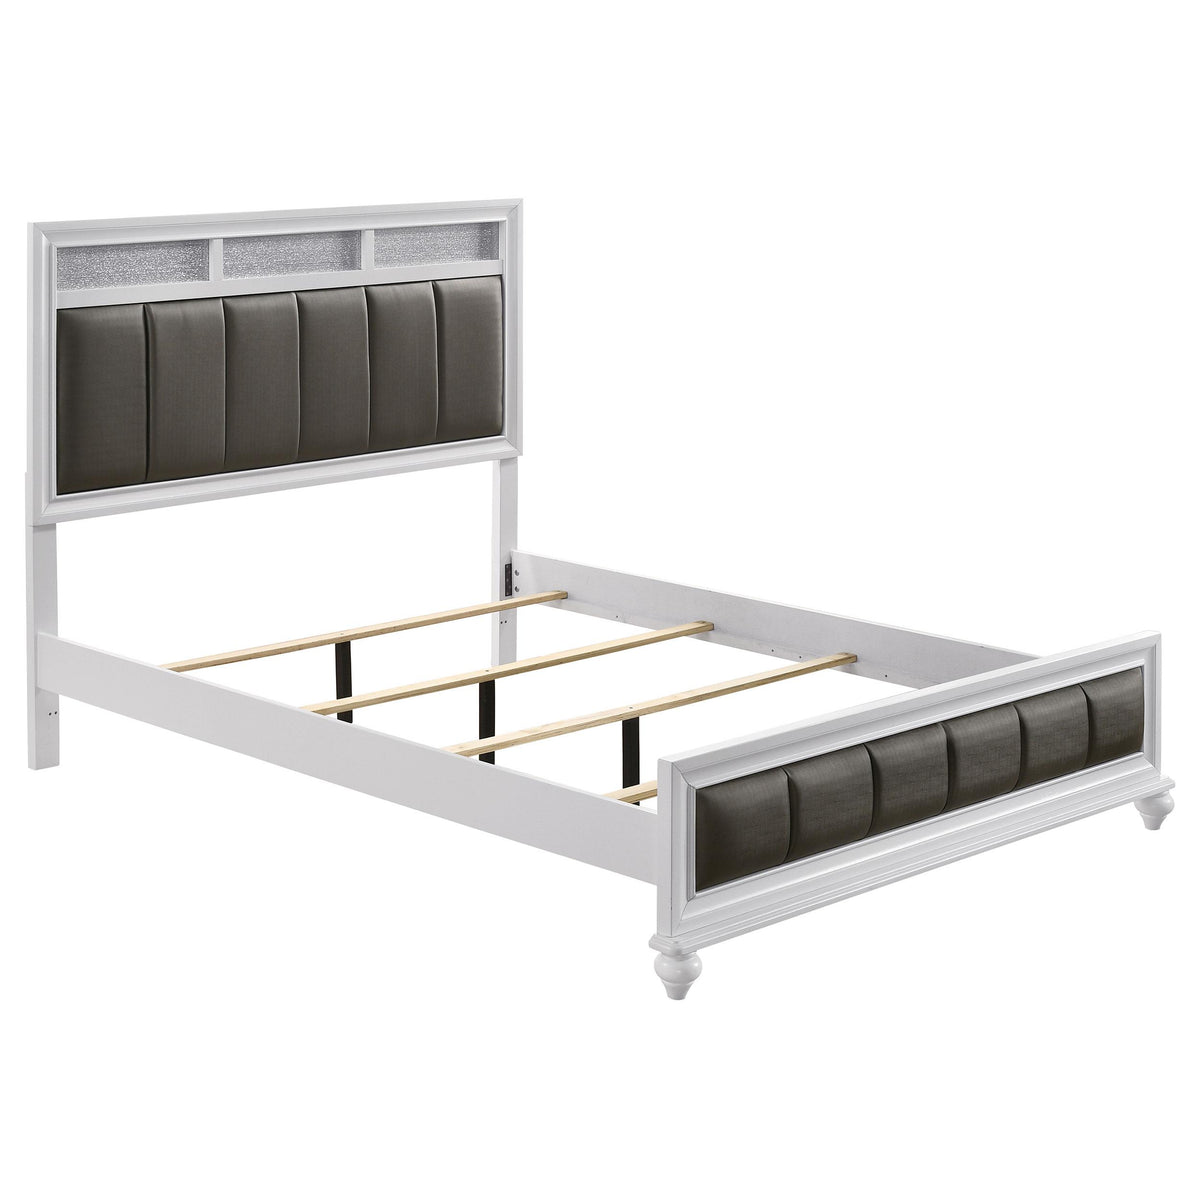 Barzini Queen Upholstered Panel Bed White Barzini Queen Upholstered Panel Bed White Half Price Furniture